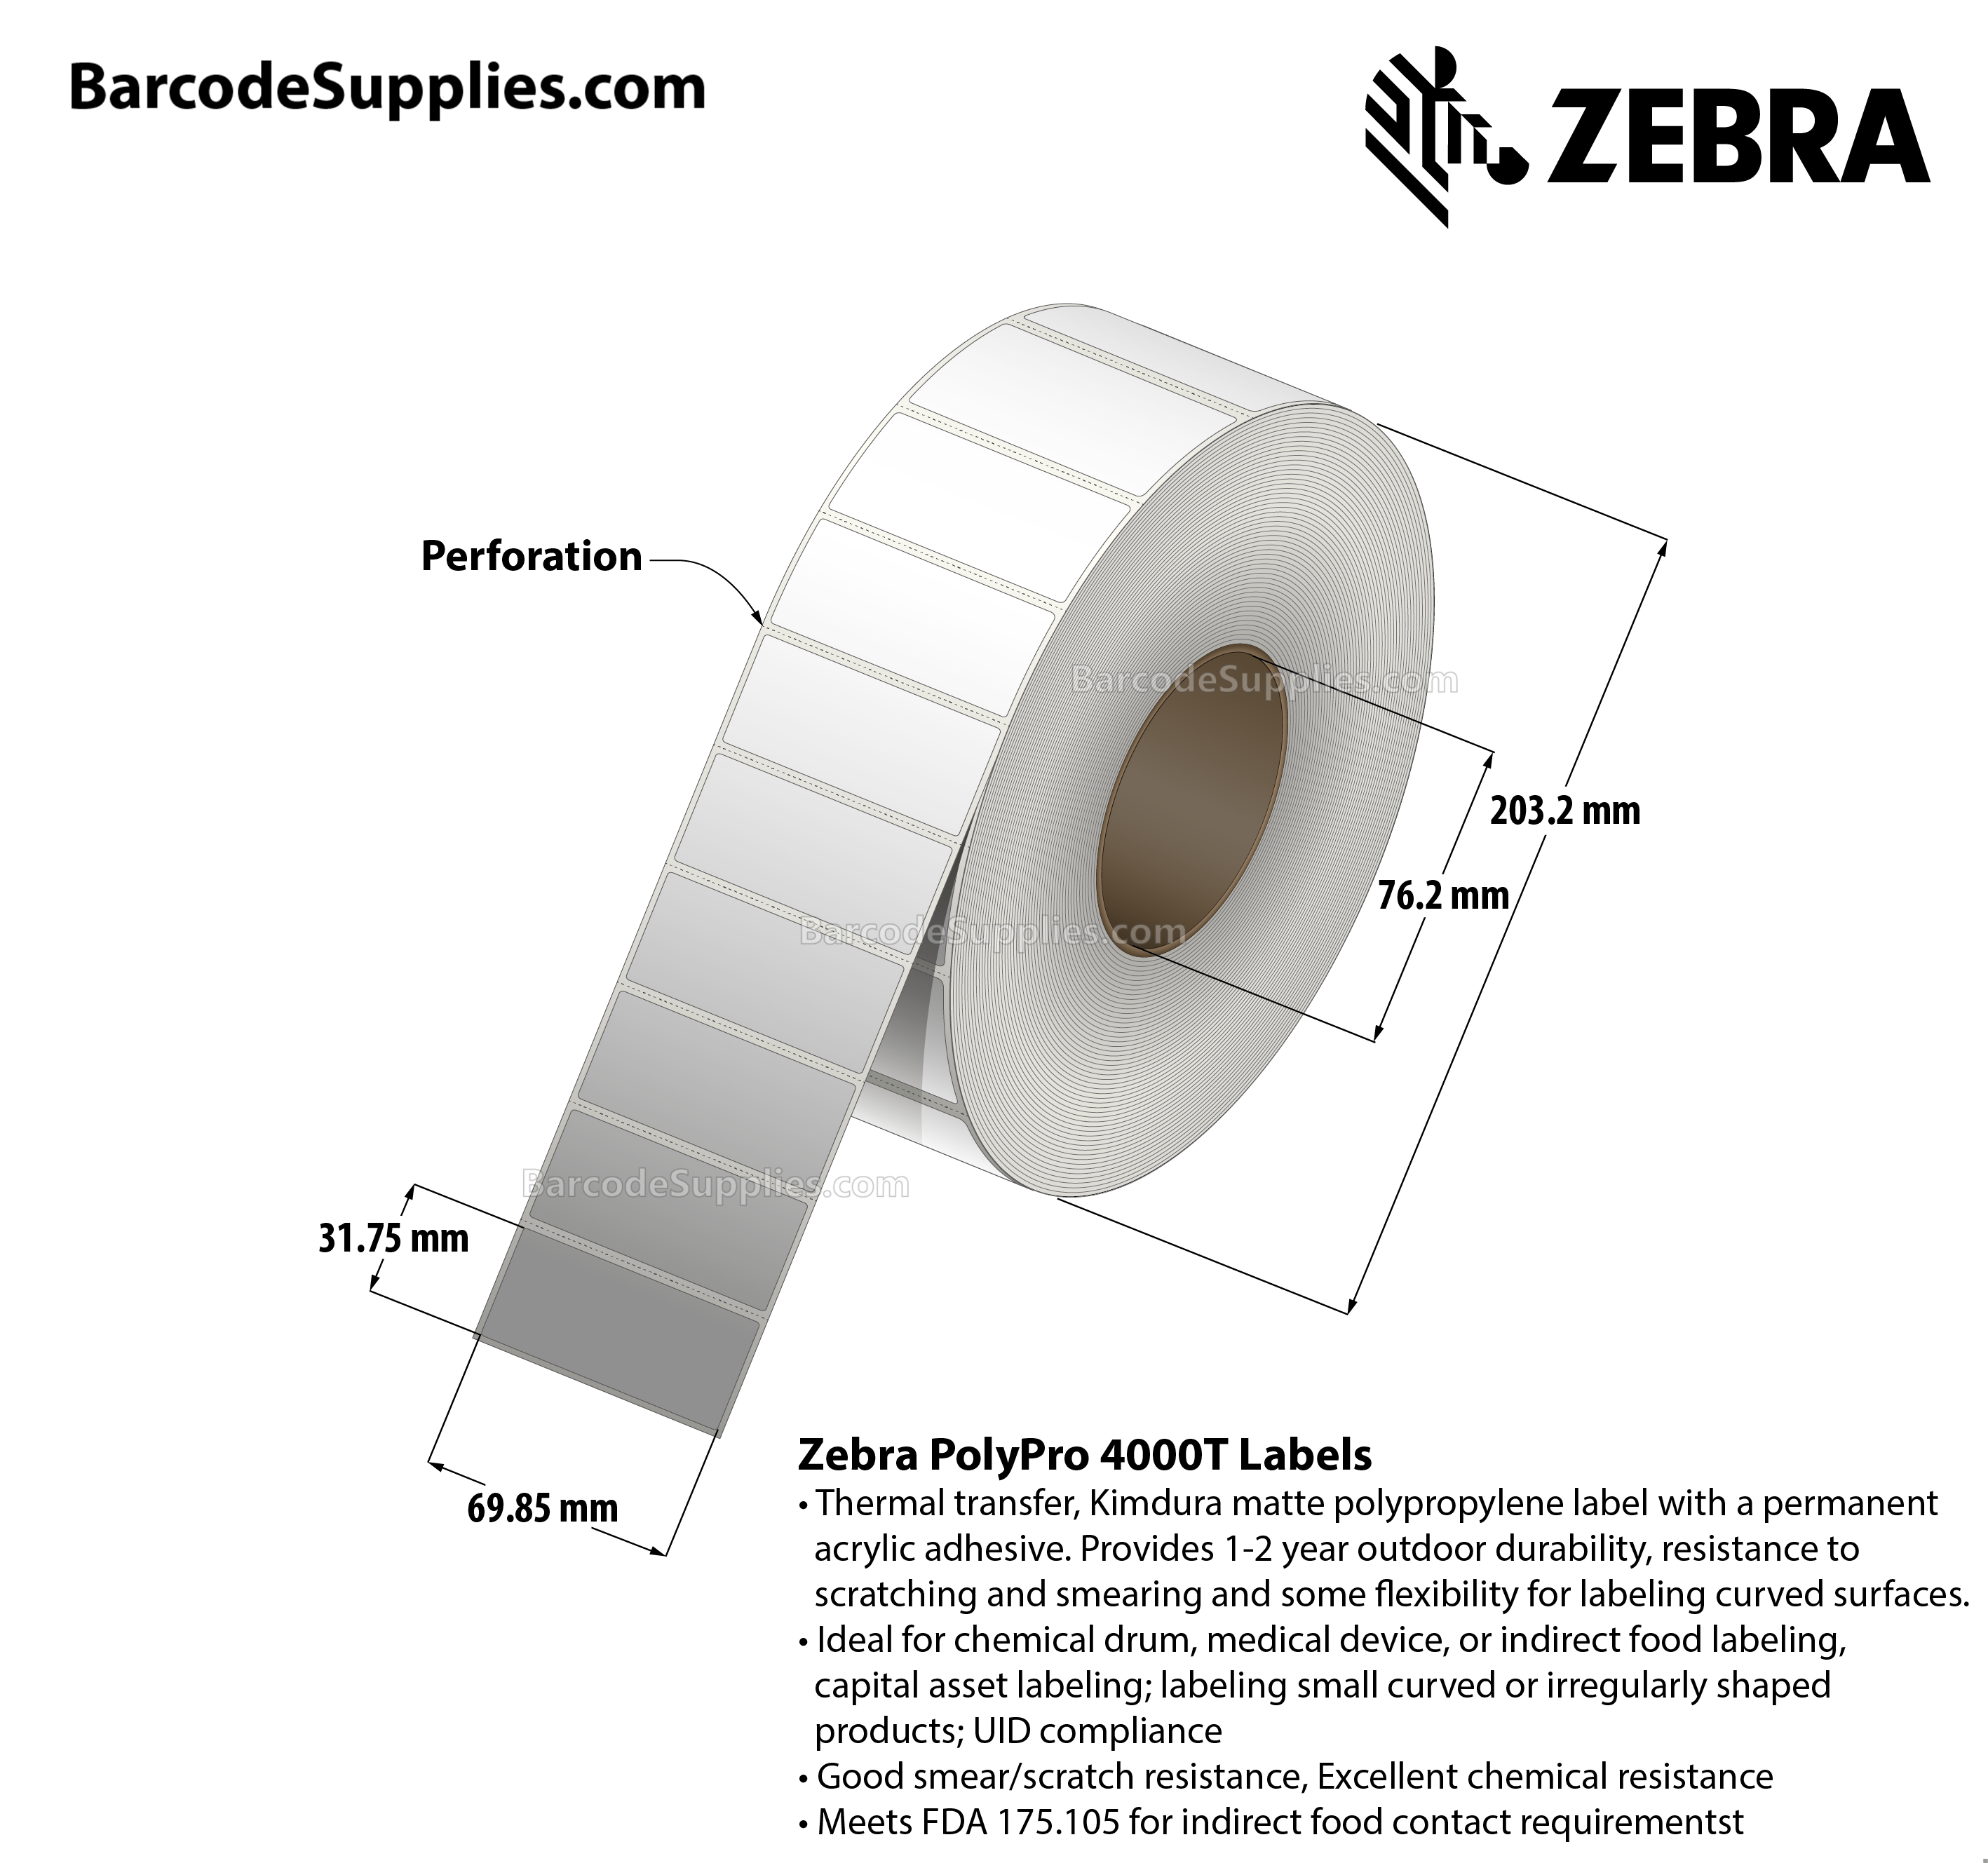 2.75 x 1.25 Thermal Transfer White PolyPro 4000T Labels With Permanent Adhesive - Perforated - 3210 Labels Per Roll - Carton Of 4 Rolls - 12840 Labels Total - MPN: 10014717